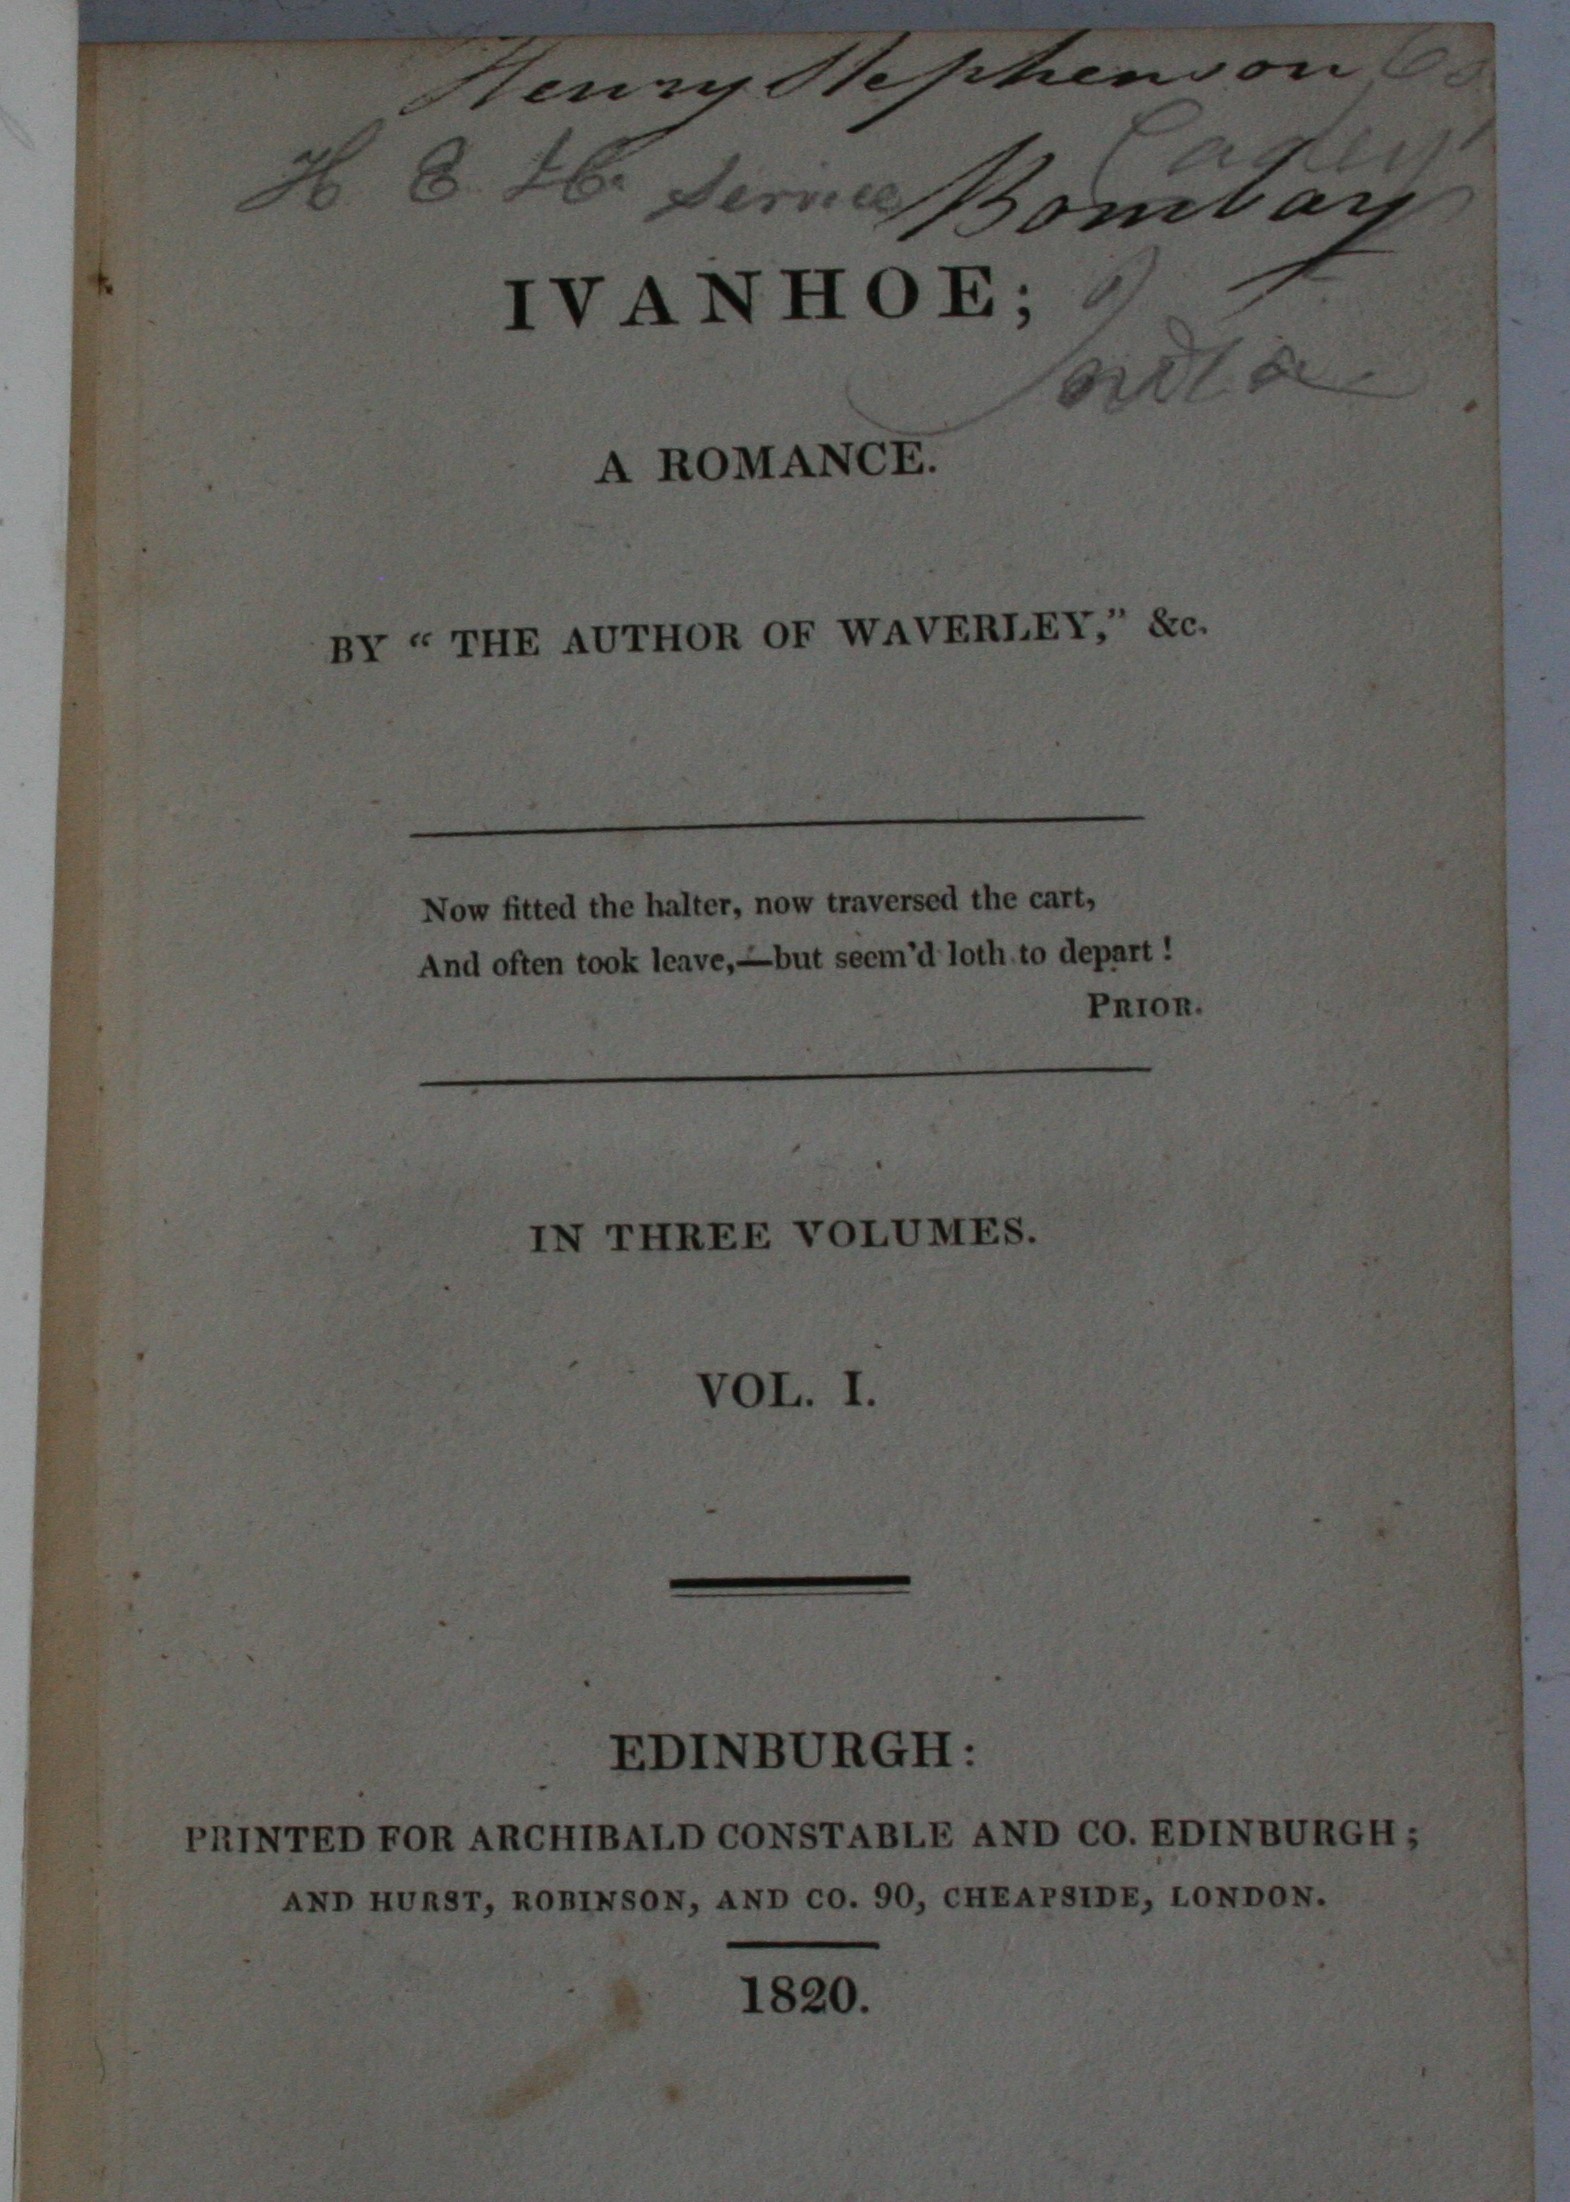 SCOTT, Walter, Ivanhoe. Archibald Constable & Co, Edinburgh. 1820 1 st edition in 3 volumes. This is - Image 3 of 3